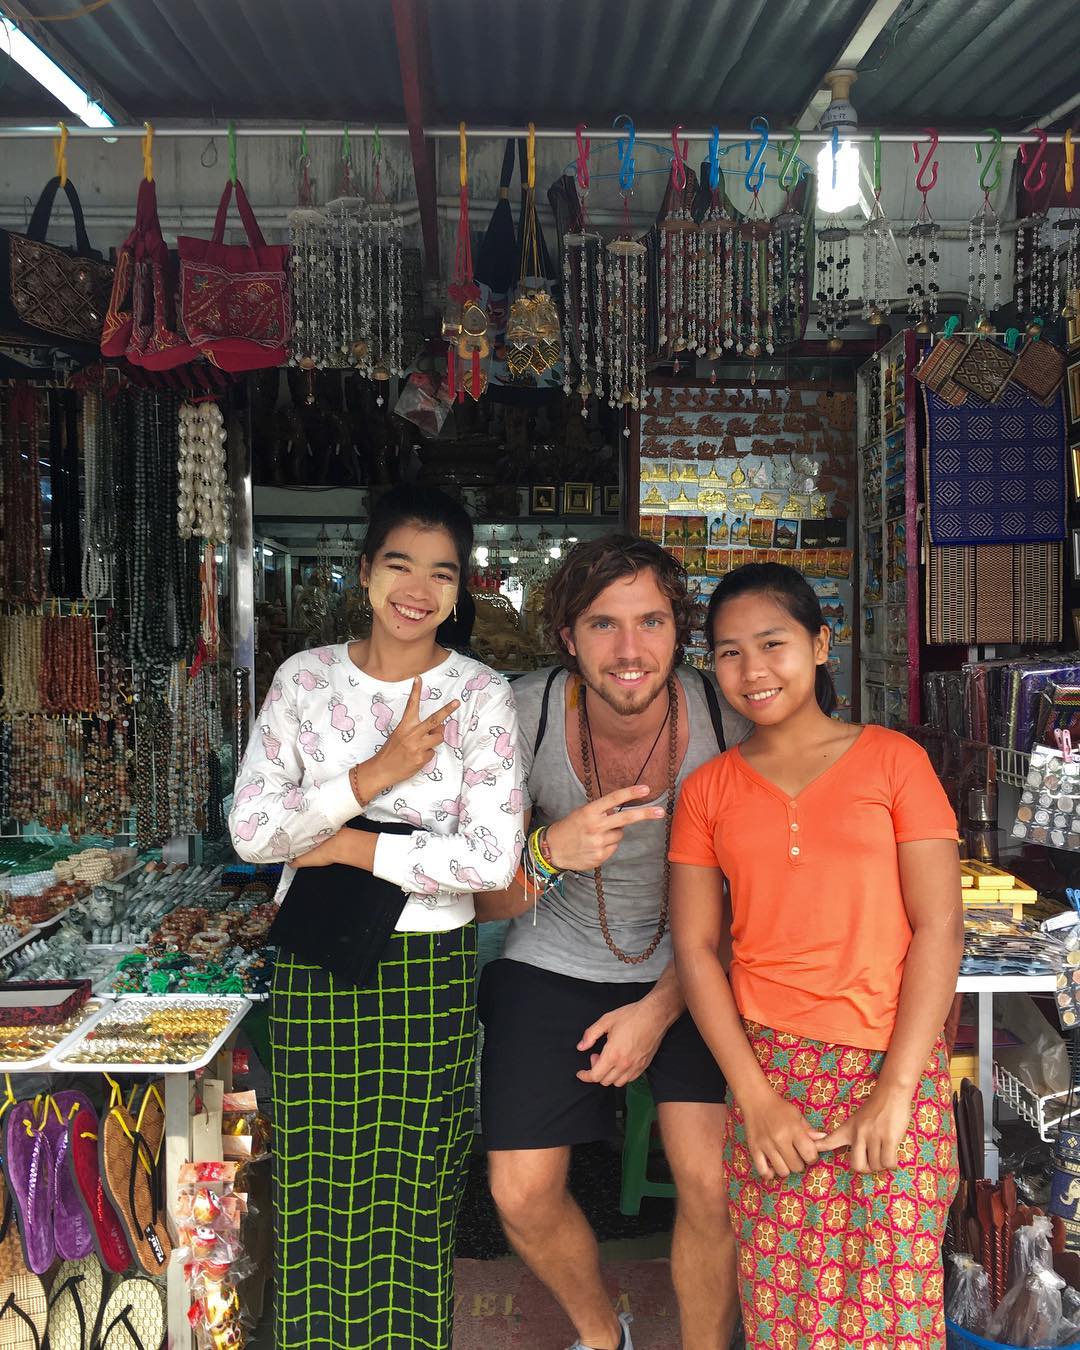 me and two local women in a souvenir shop in Myanmar